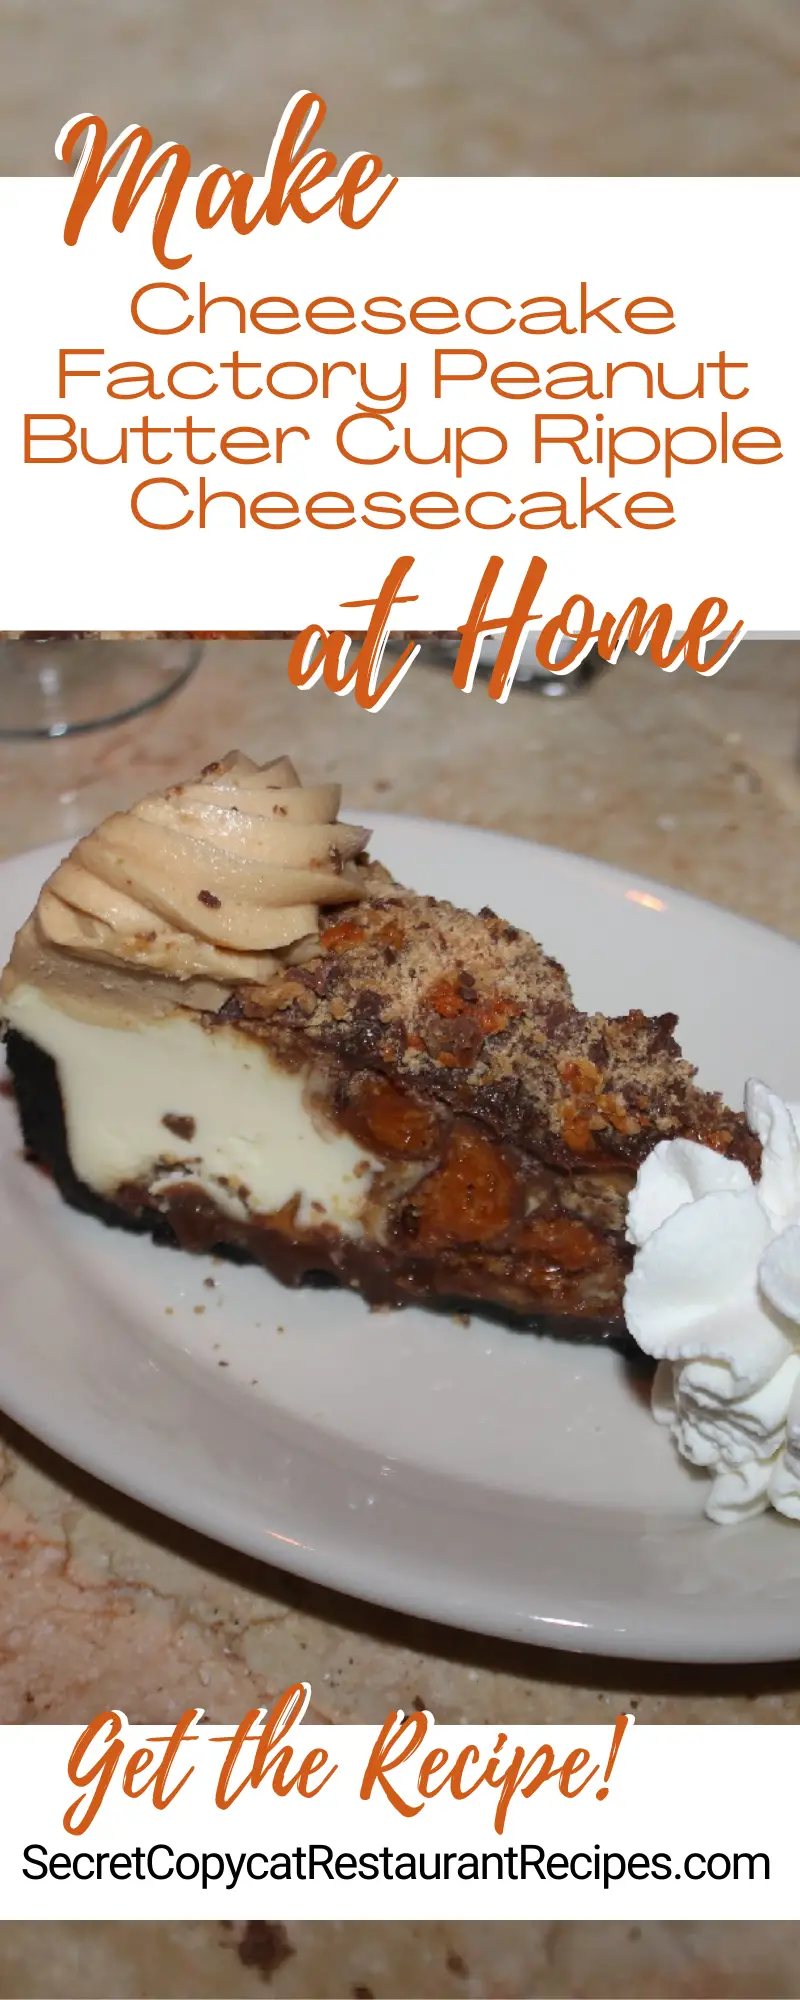 Cheesecake Factory Peanut Butter Cup Ripple Cheesecake Recipe